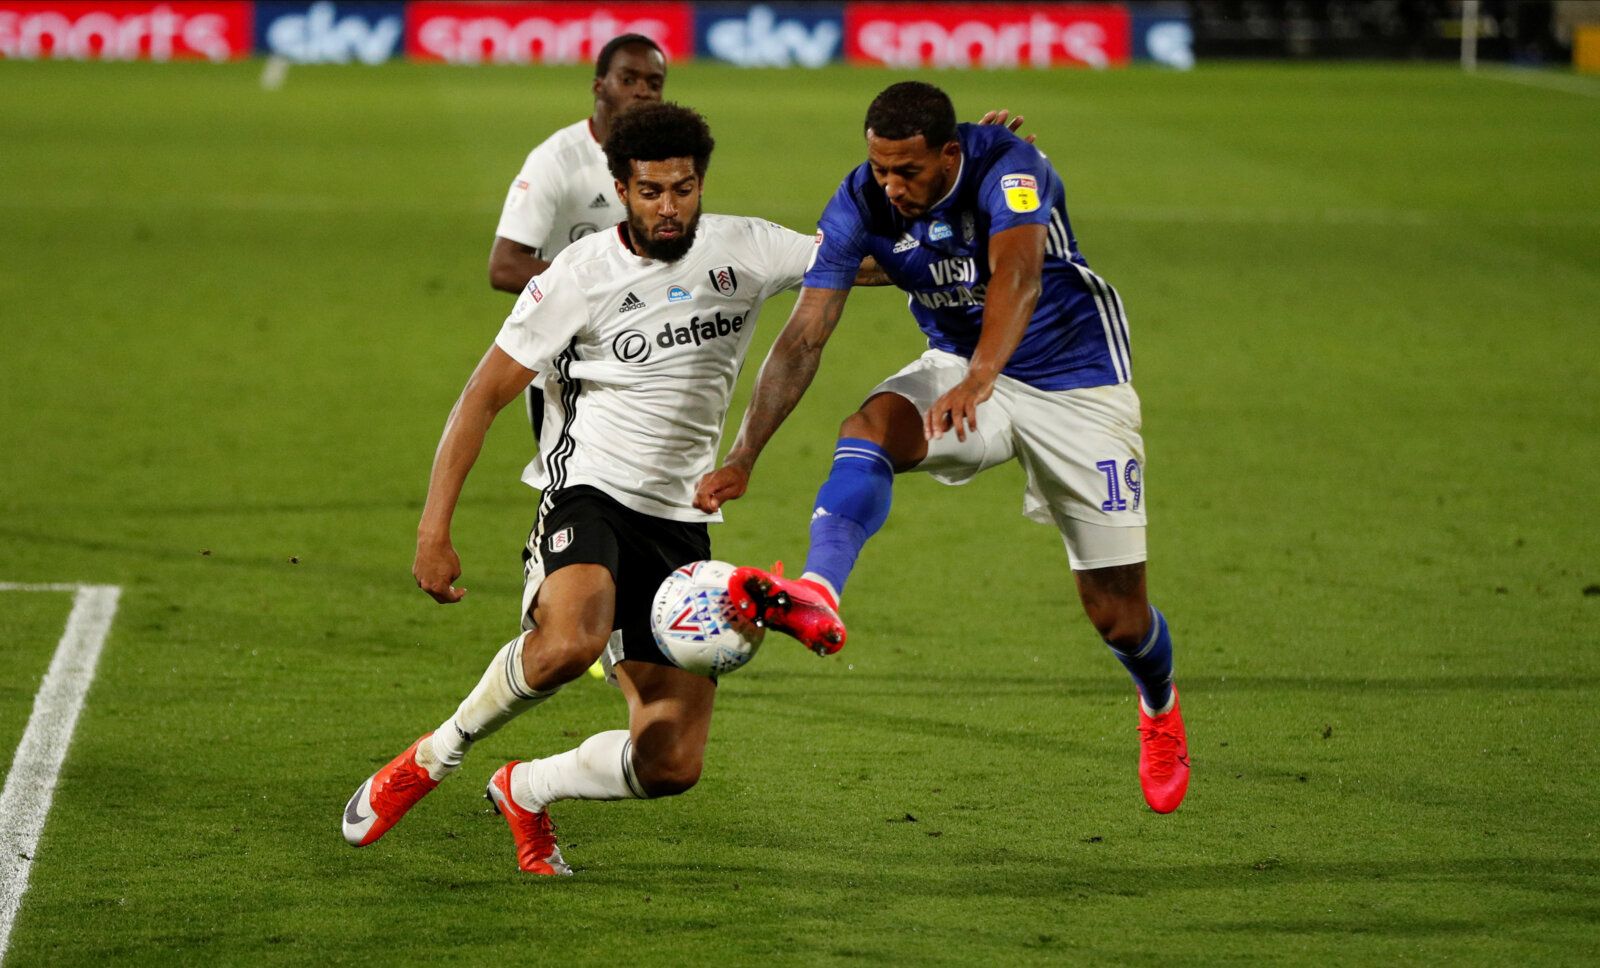 Soccer Football - Championship - Fulham v Cardiff City - Craven Cottage, London, Britain - July 10, 2020  Cardiff City's Nathaniel Mendez-Laing in action with Fulham’s Cyrus Christie, as play resumes behind closed doors following the outbreak of the coronavirus disease (COVID-19)  Action Images/John Sibley  EDITORIAL USE ONLY. No use with unauthorized audio, video, data, fixture lists, club/league logos or 